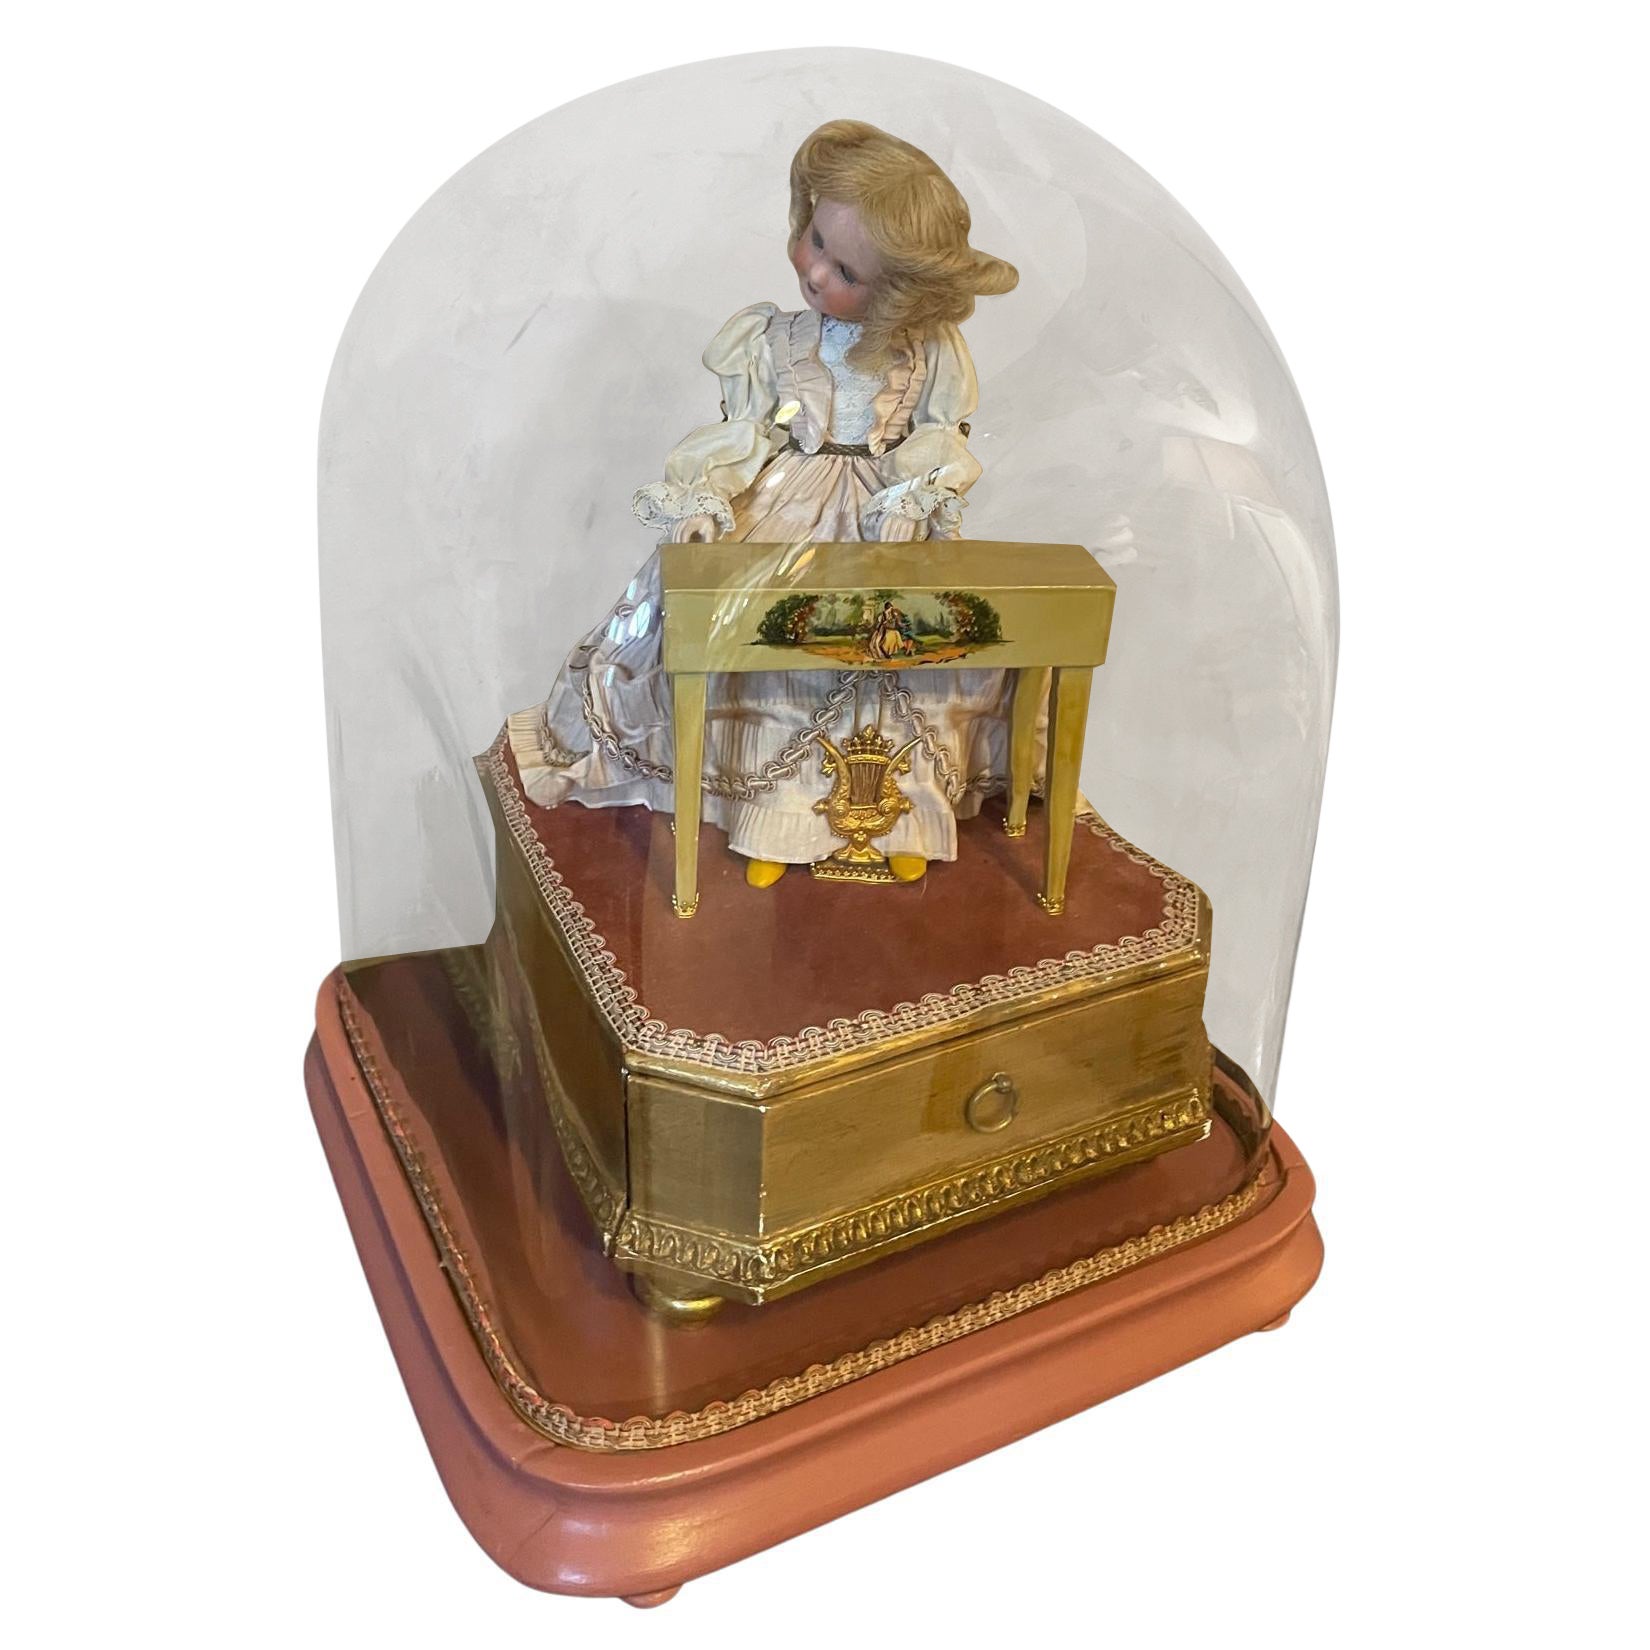 20th Century French Musical Automate by Farkas with Its Dome Glass, 1950s For Sale